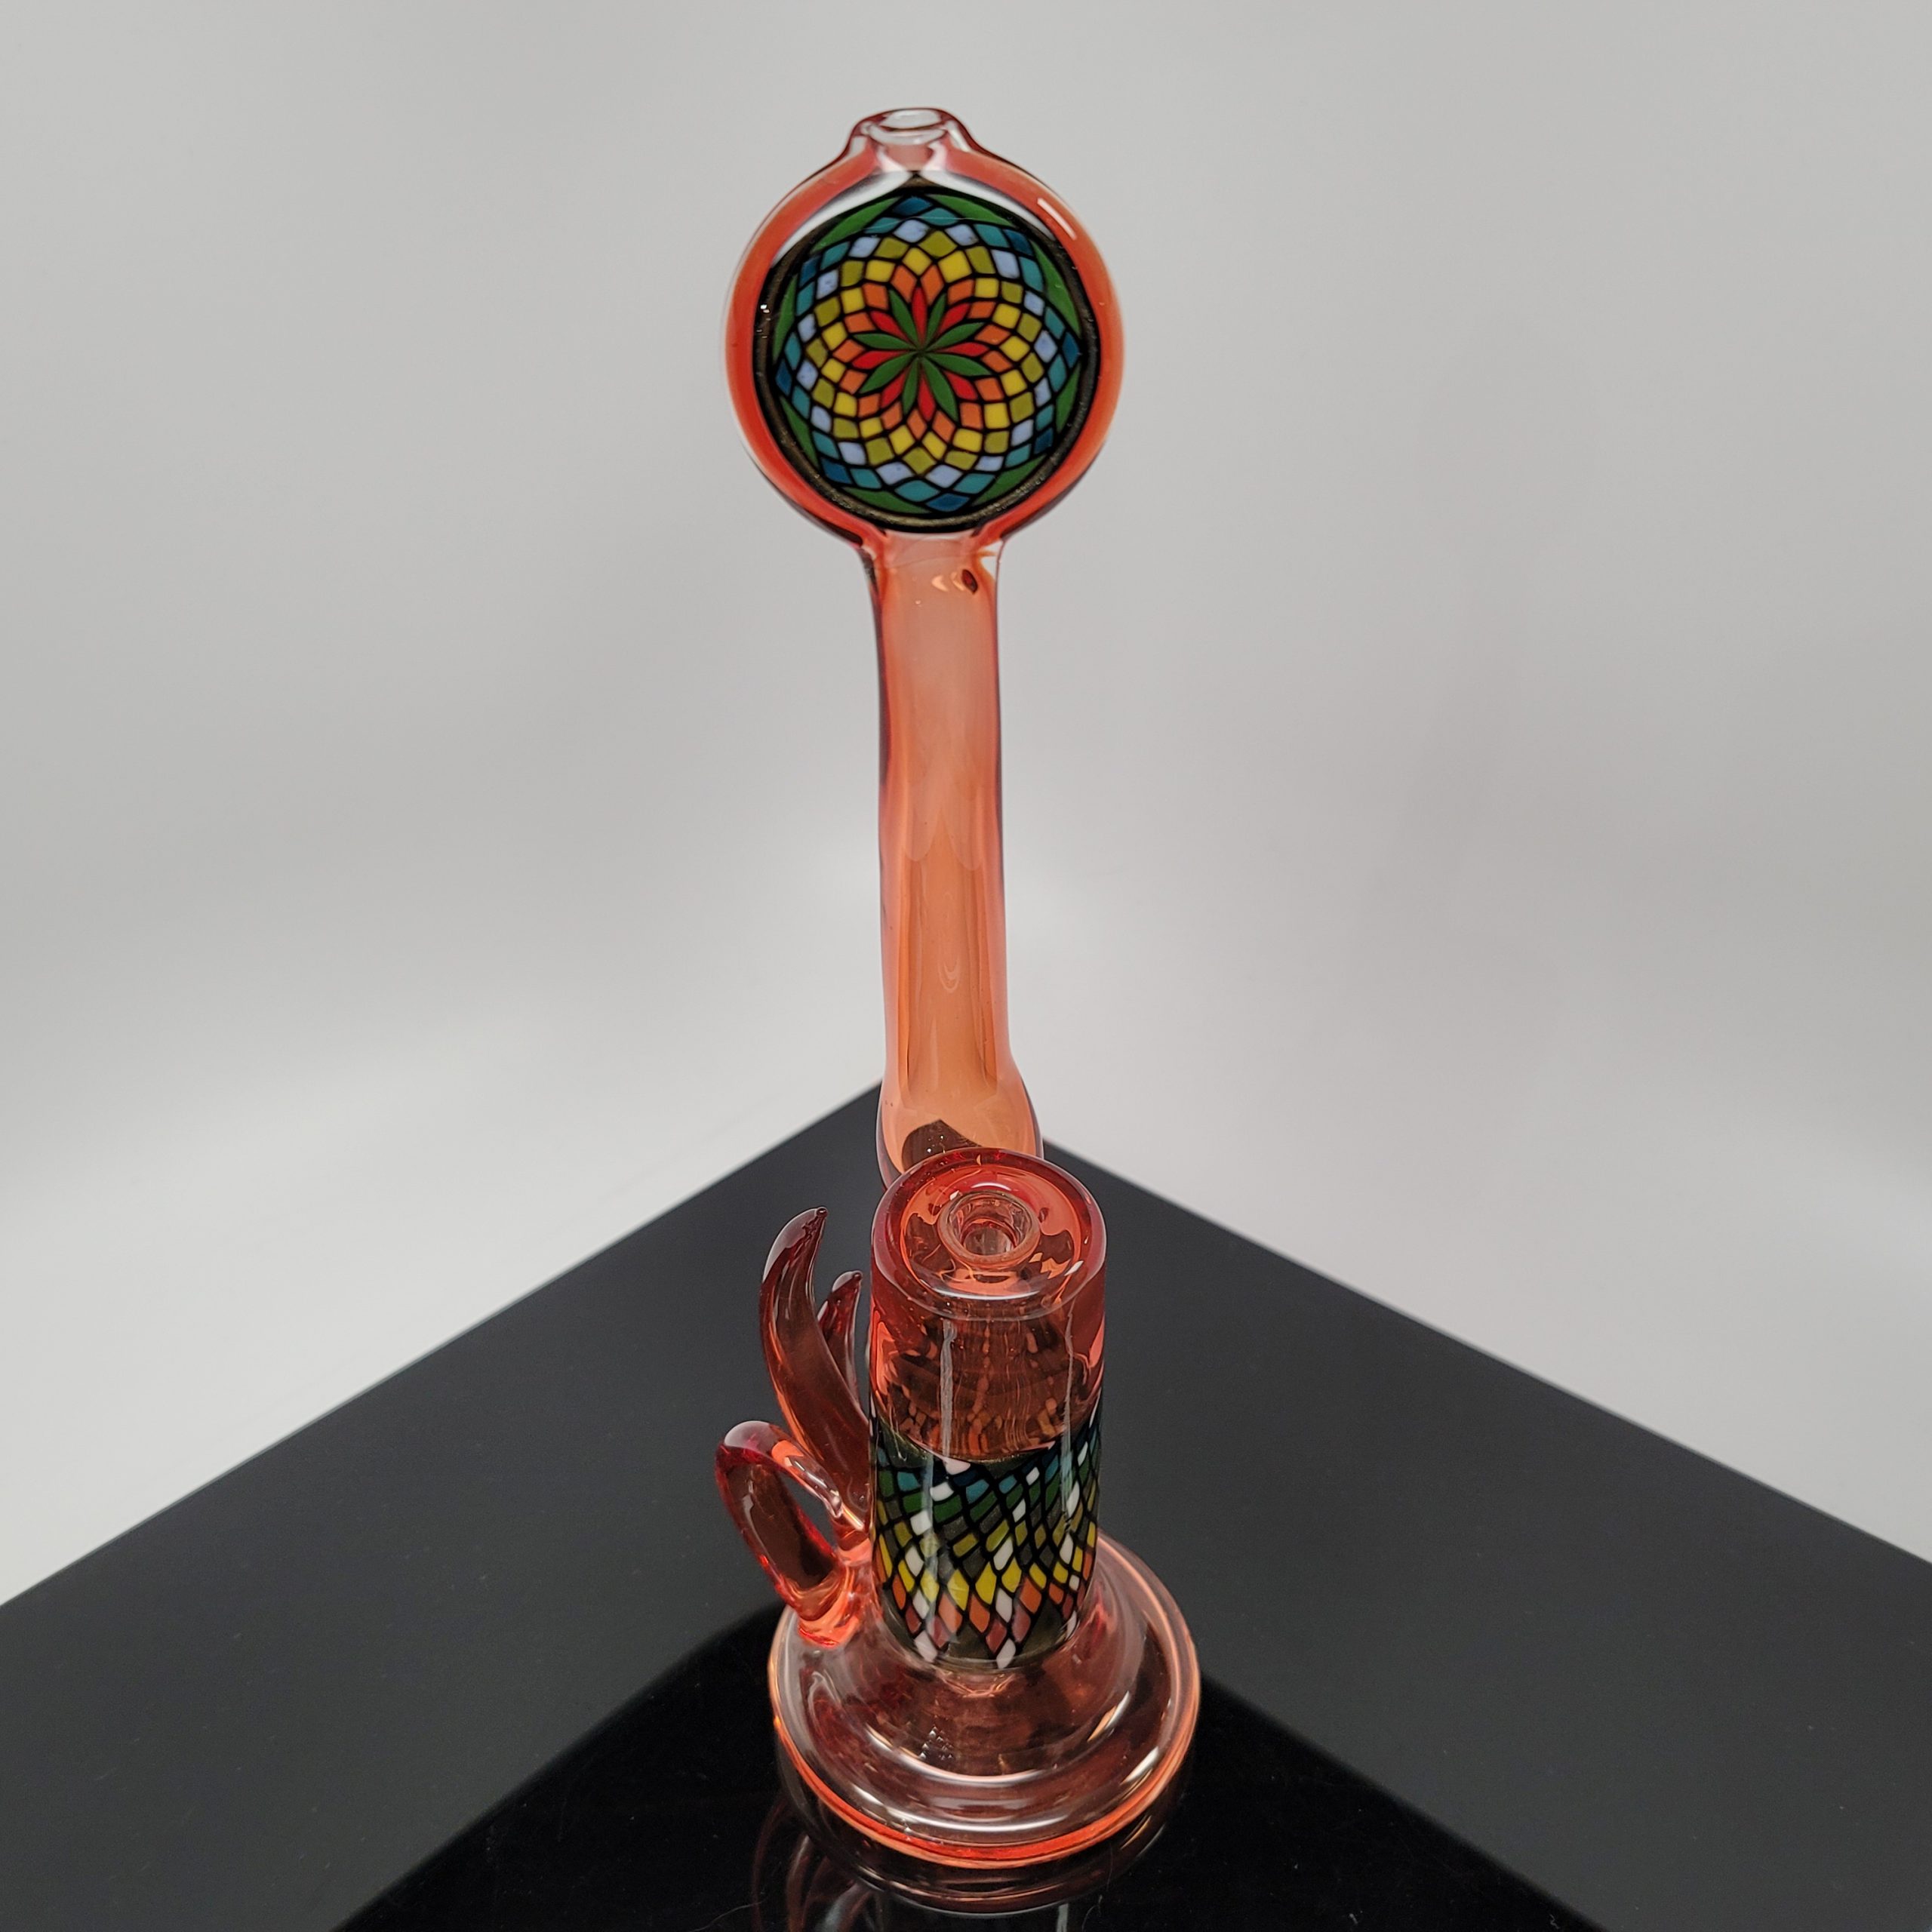 Hand Blown Glass Bubblers, Weed Bubblers